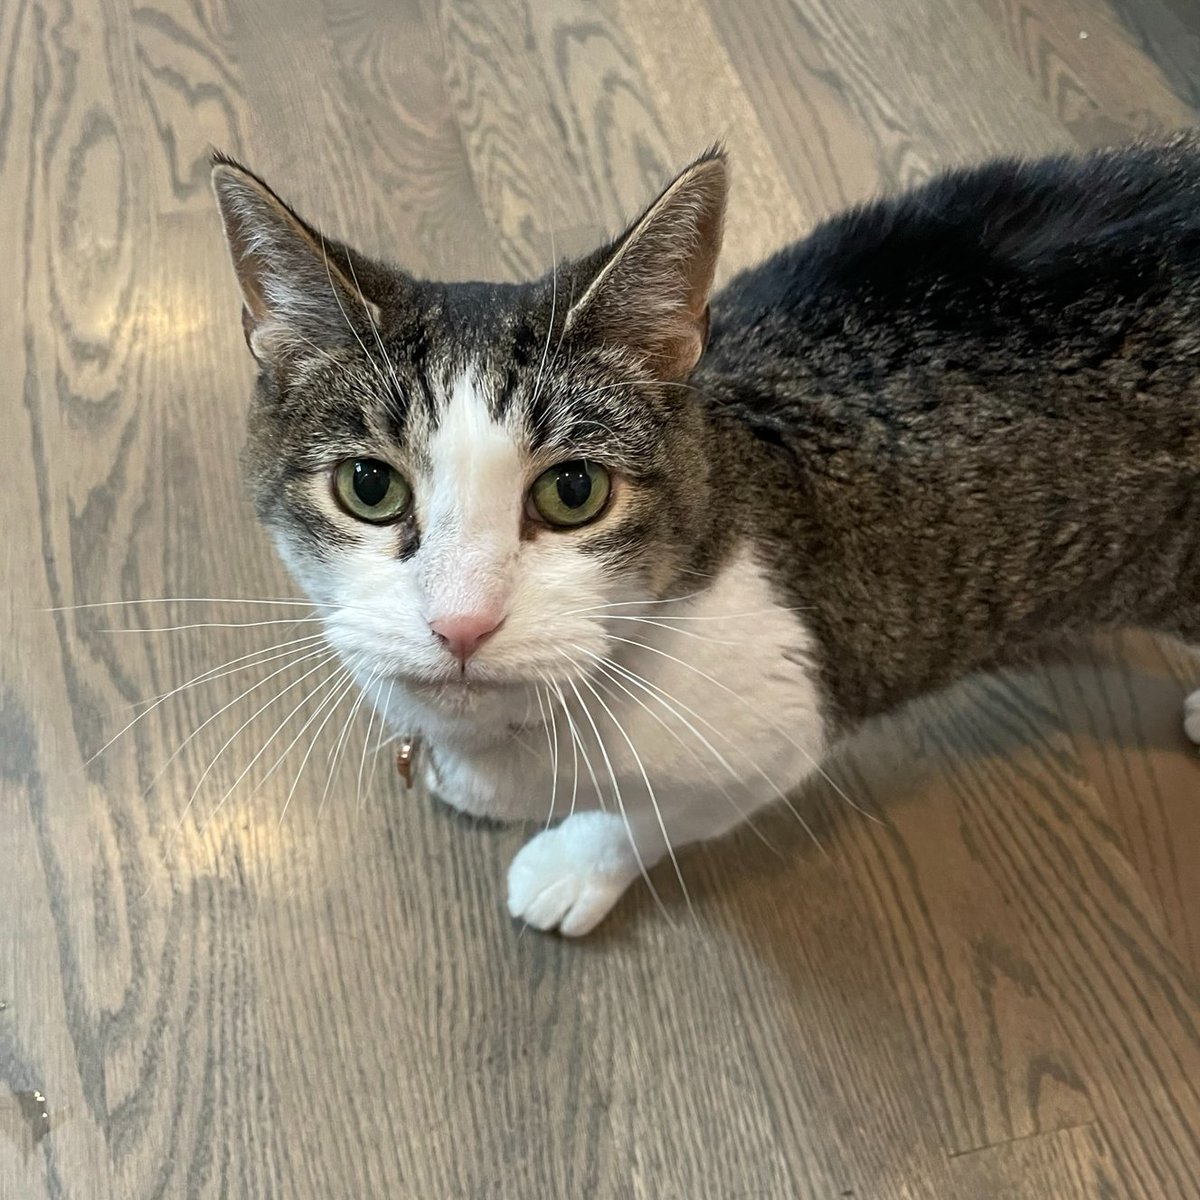 Hazel may be 12-years-old, but she is happy, playful and affectionate. She's also got a purring engine that goes for as long as you’ll pet her. Fill out an application for this queen at aliverescue.org/adopt.